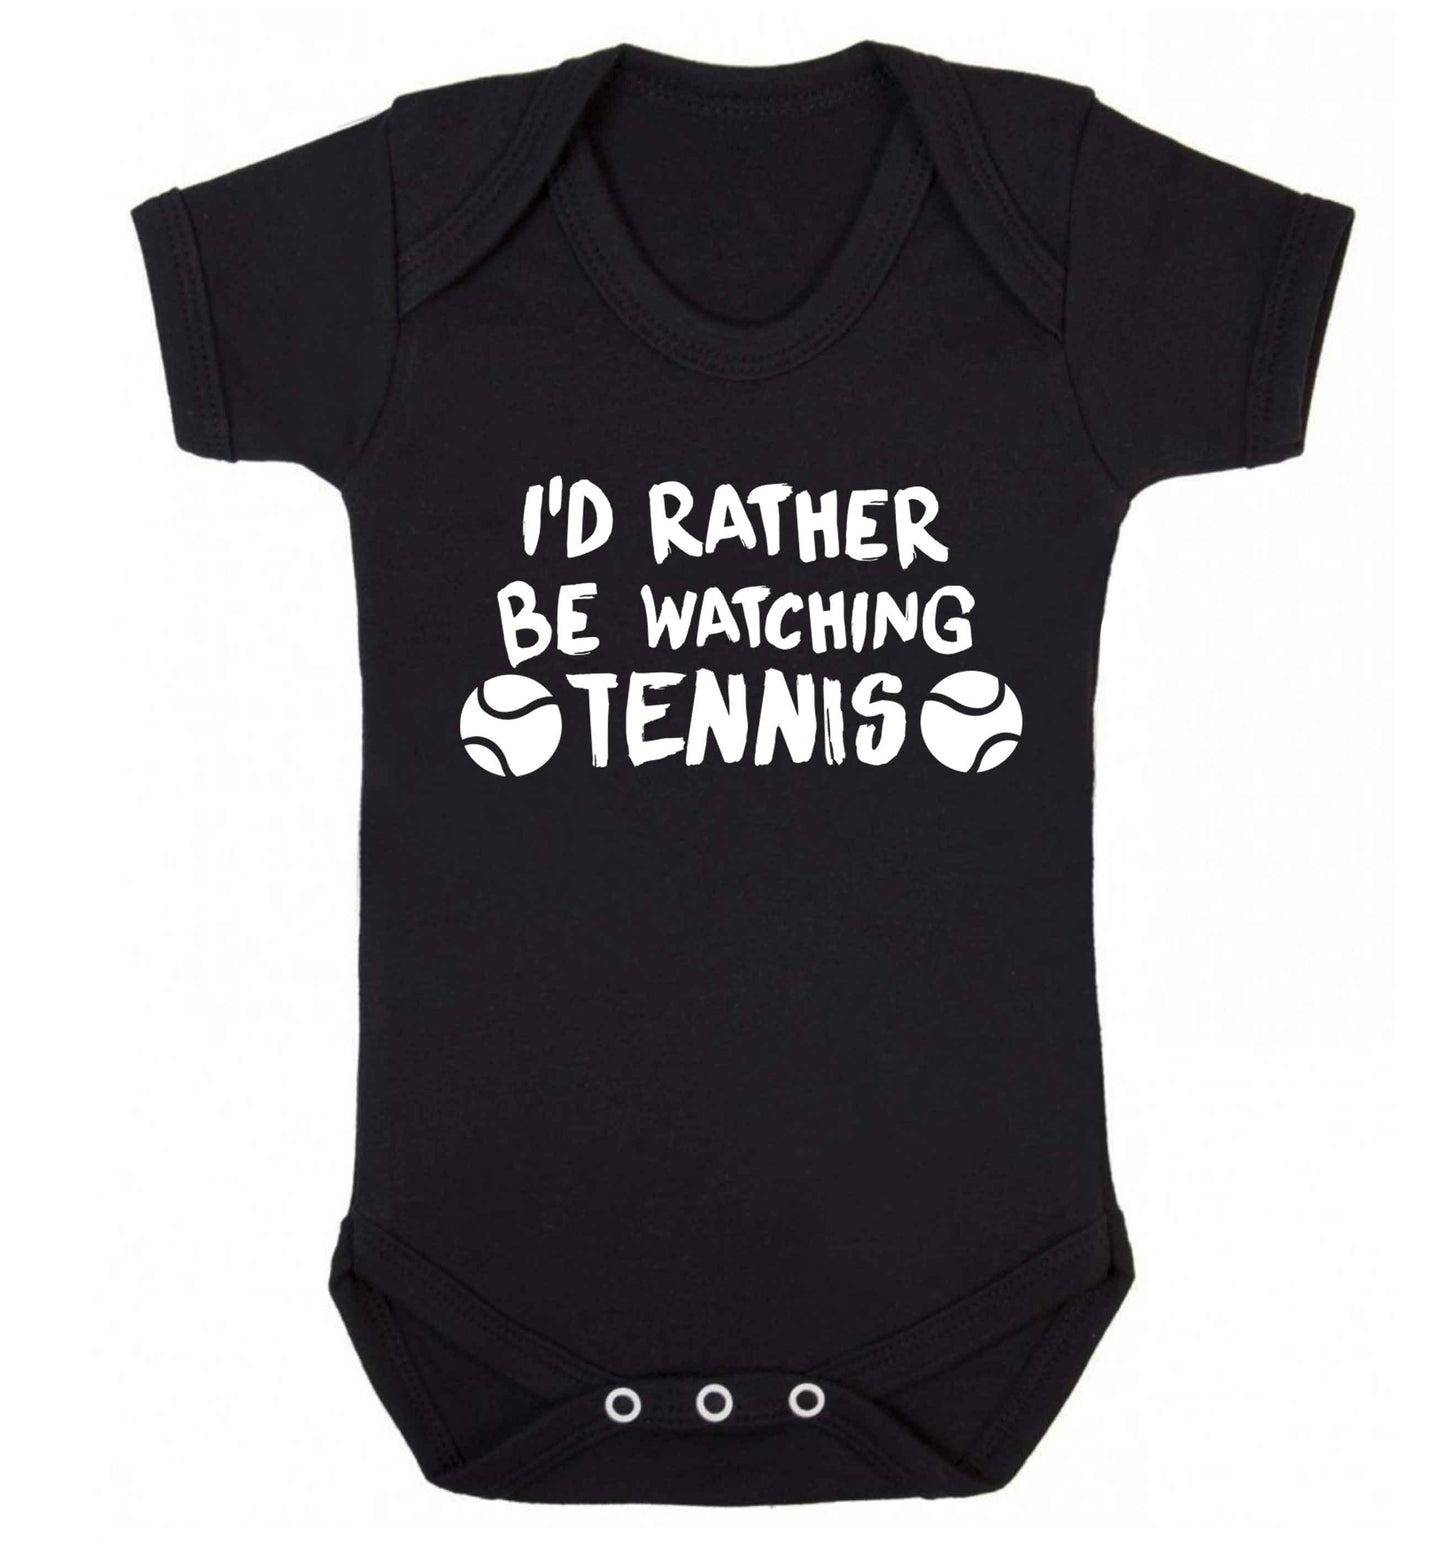 I'd rather be watching the tennis Baby Vest black 18-24 months